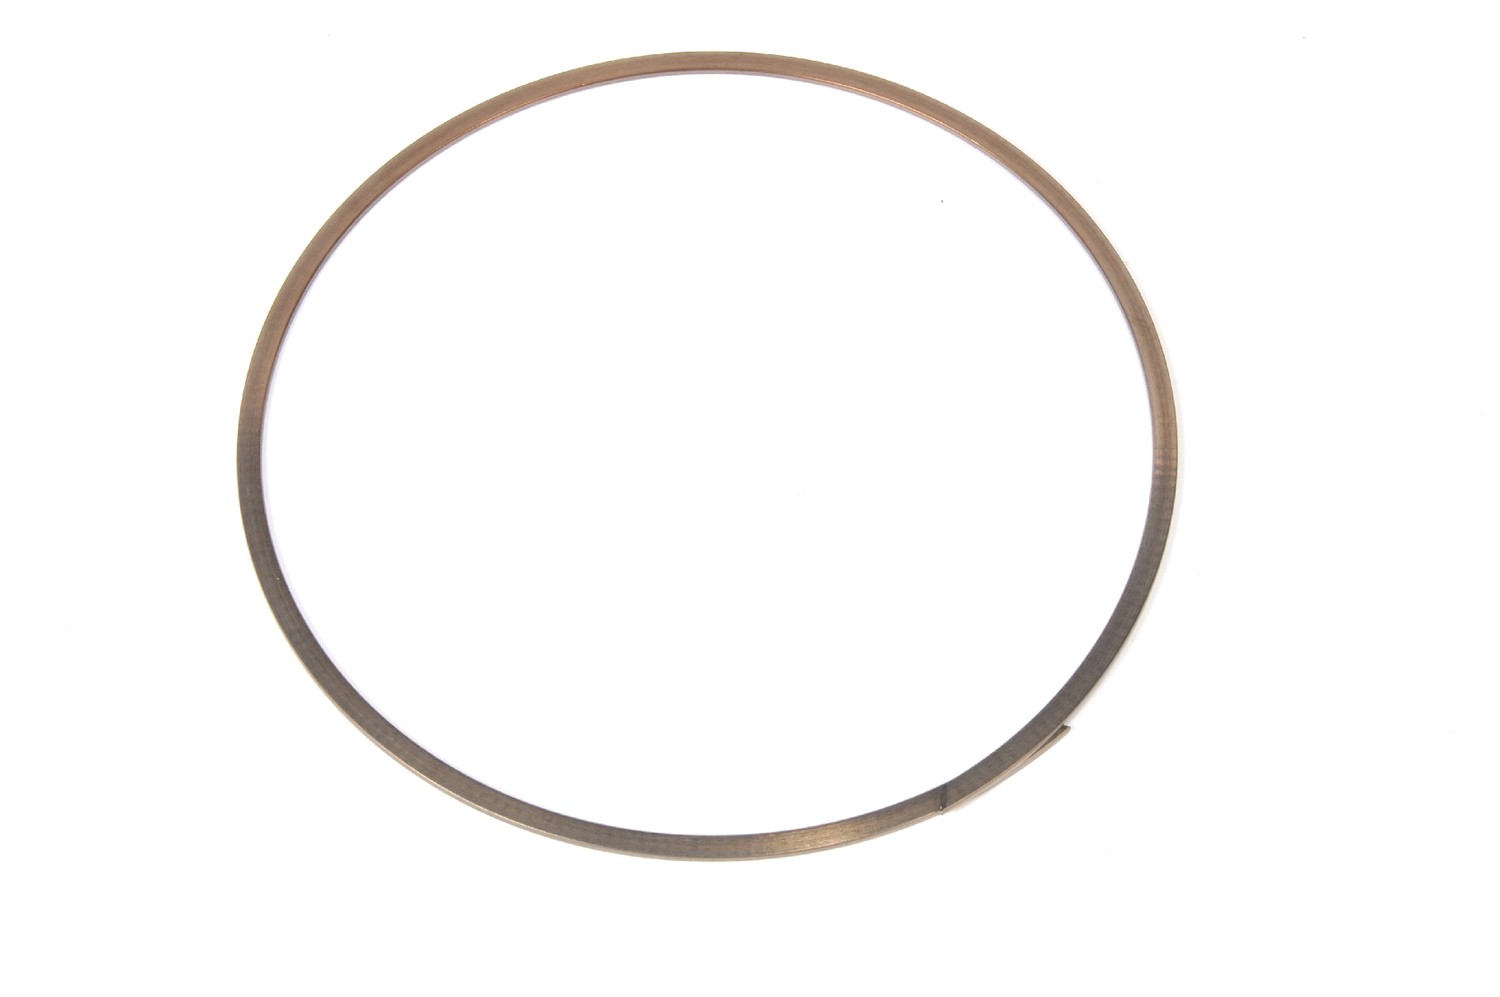 GM GENUINE PARTS - Automatic Transmission Clutch Backing Plate Retaining Ring - GMP 24267681